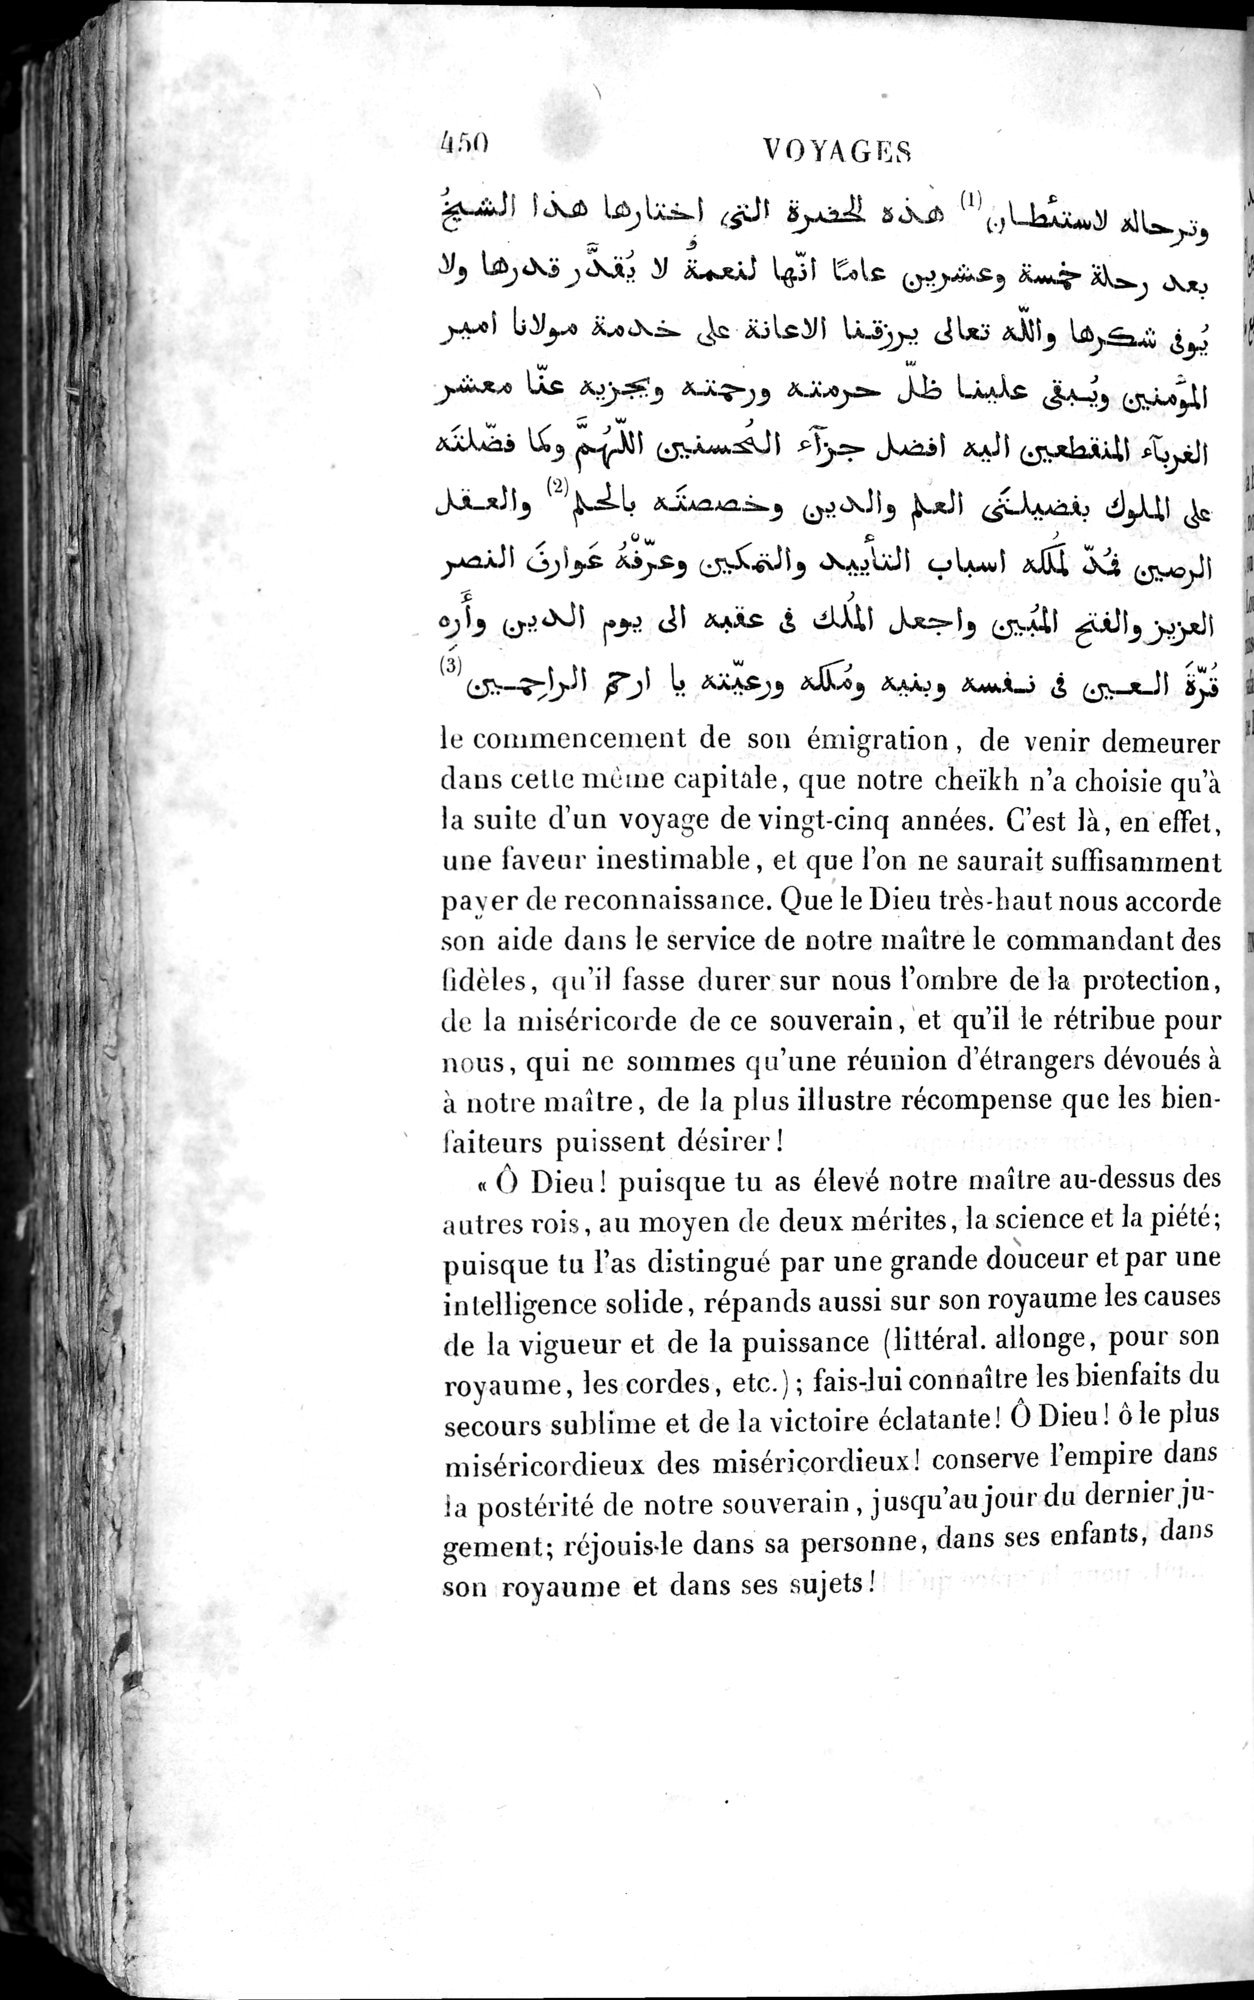 Voyages d'Ibn Batoutah : vol.4 / Page 462 (Grayscale High Resolution Image)